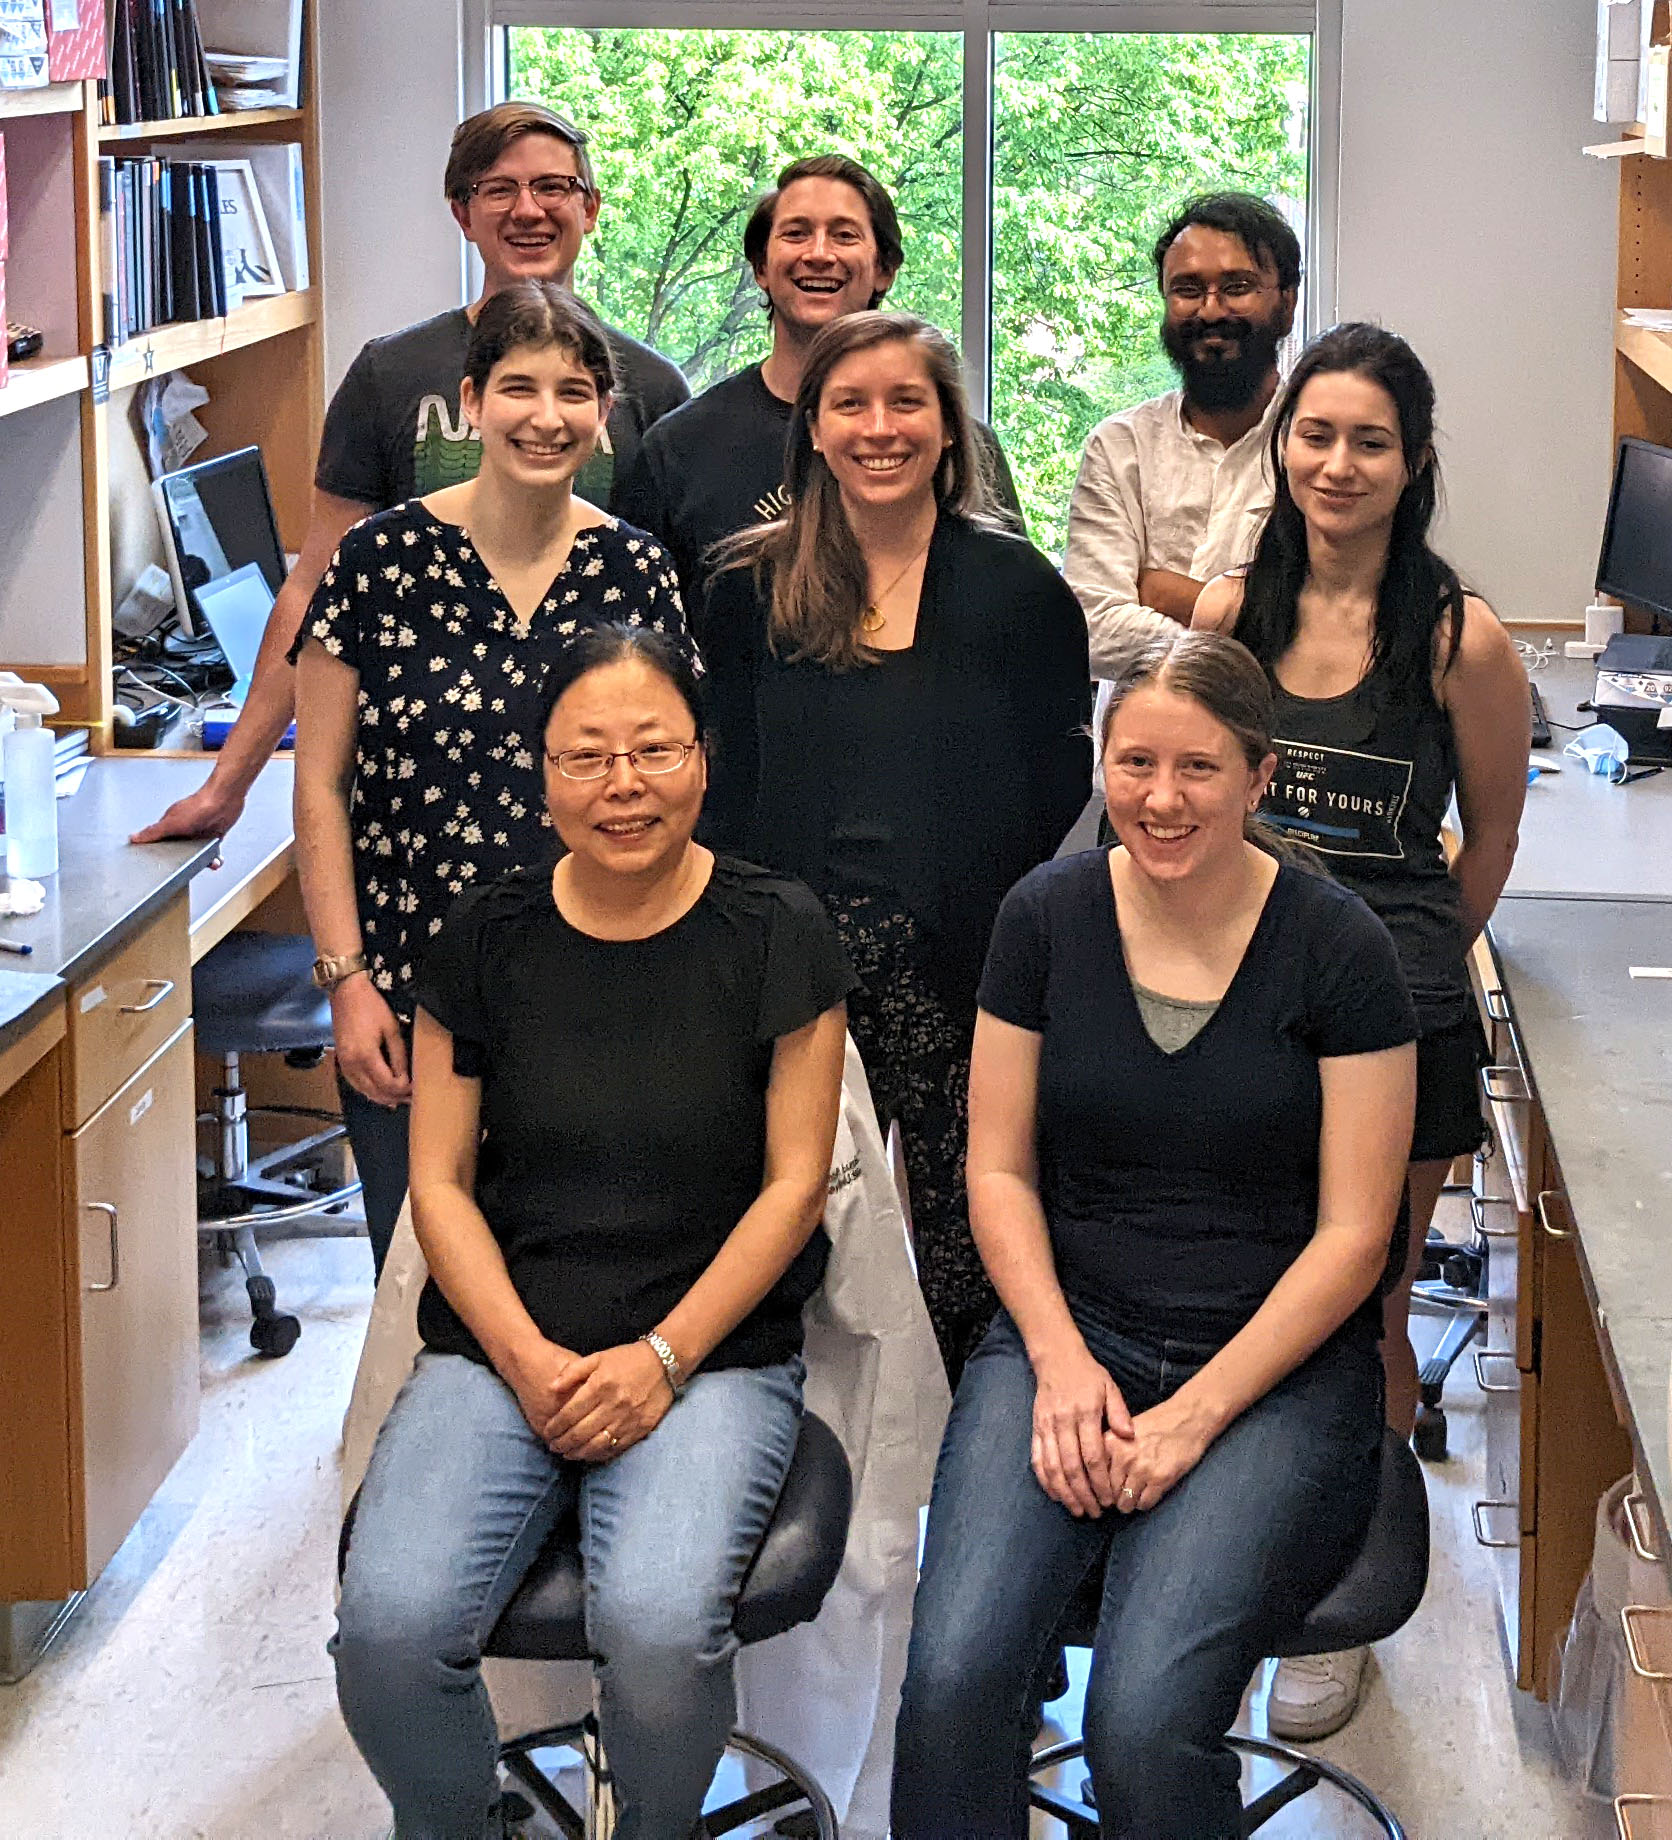 Thi Ngo front left and Alissa front right sitting with other members of the Tate lab in front of a window. Everyone smiling